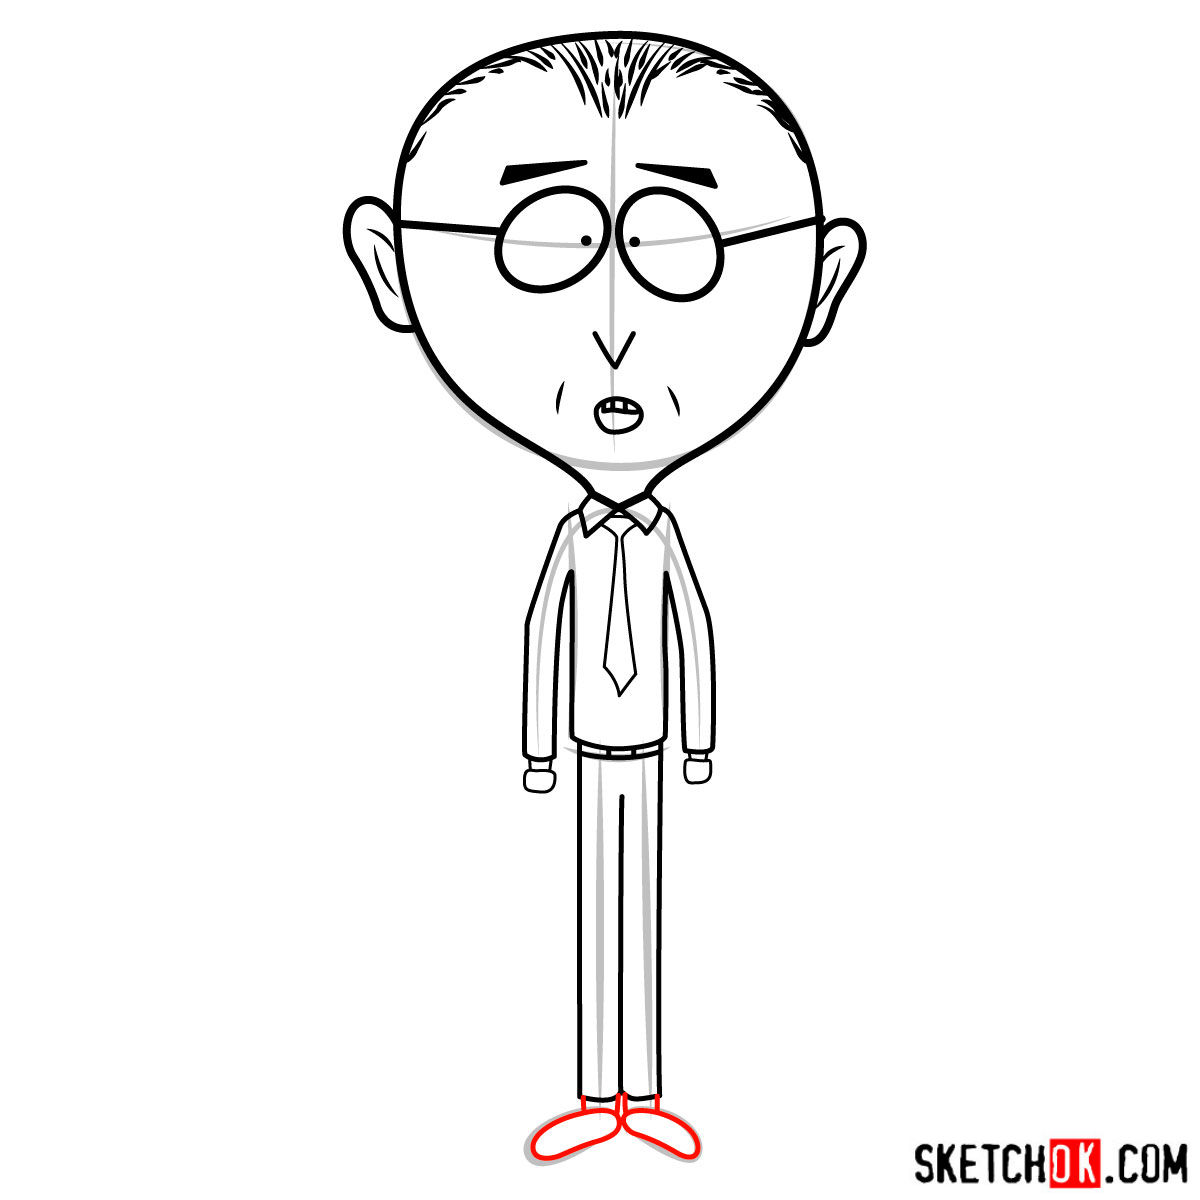 How to draw Mr. Mackey from South Park - step 08